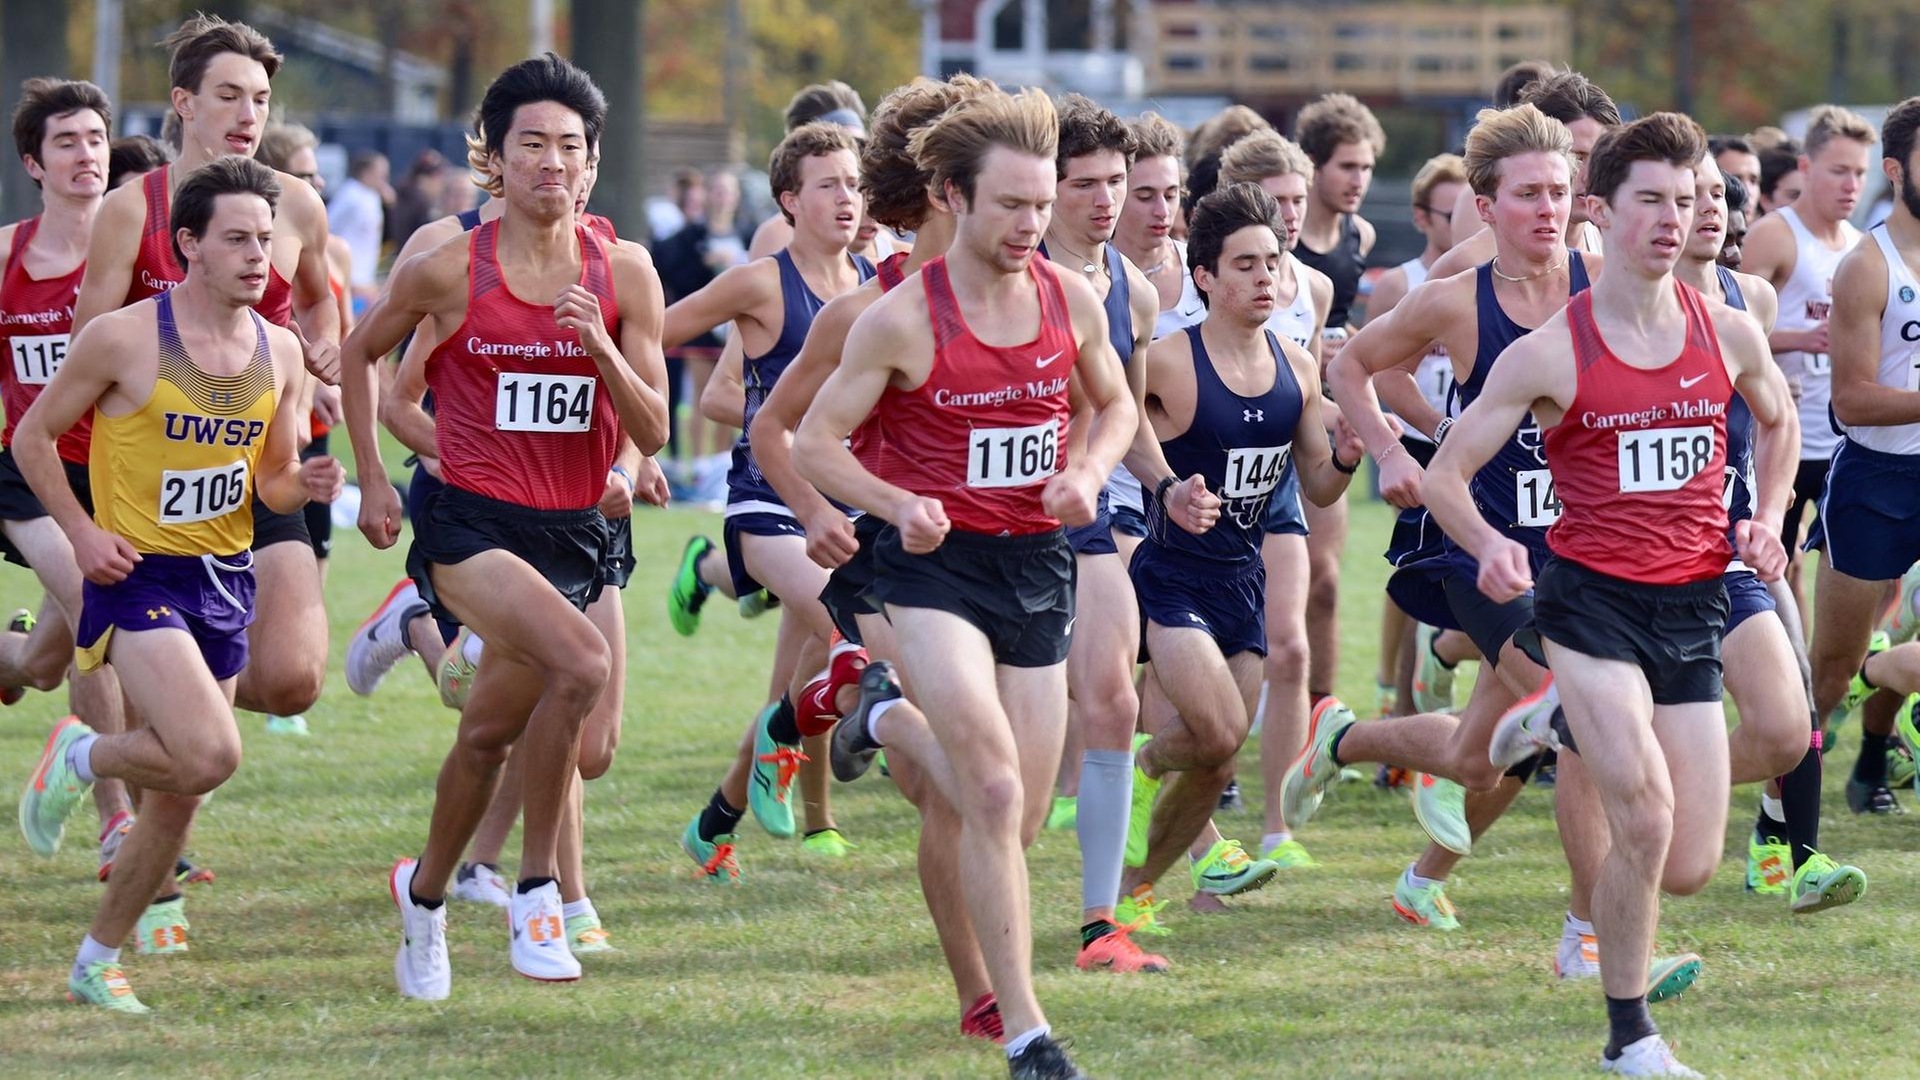 Tartans Place Second At UAA Championships